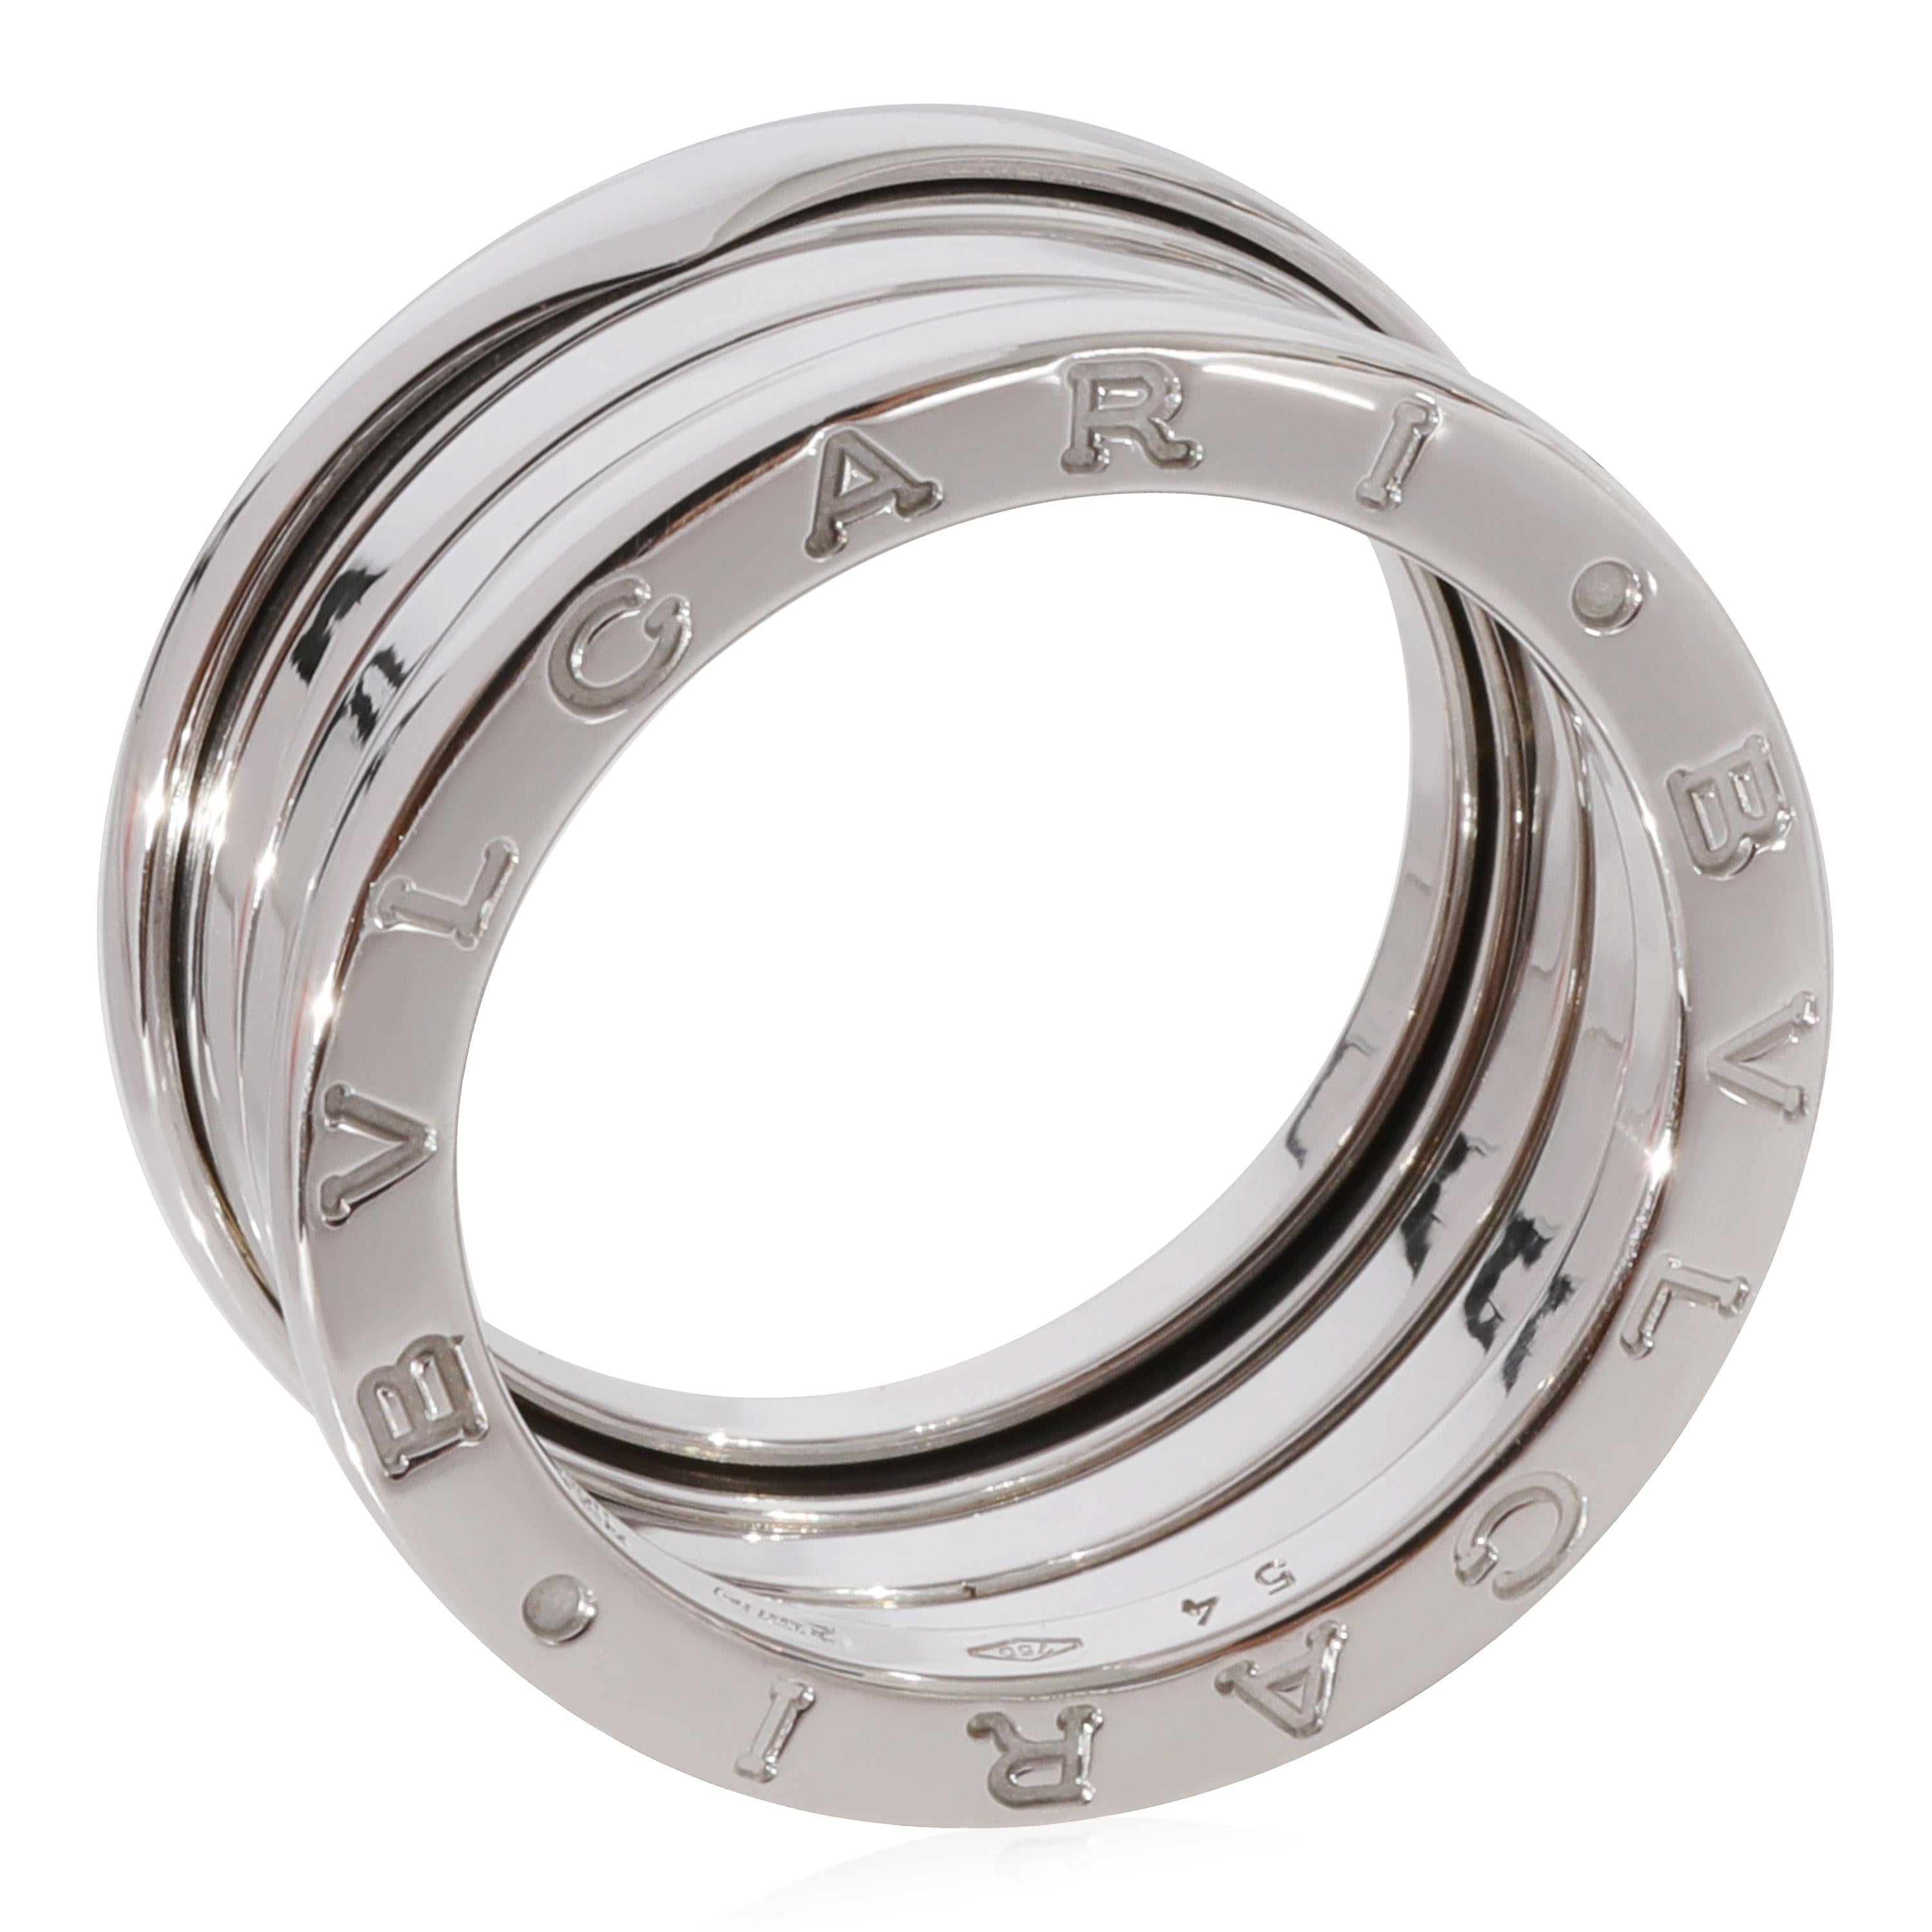 BVLGARI B.Zero1 Ring in 18K White Gold

PRIMARY DETAILS
SKU: 123517
Listing Title: BVLGARI B.Zero1 Ring in 18K White Gold
Condition Description: Retails for 3150 USD. In excellent condition and recently polished.
Brand: BVLGARI
Collection/Series: